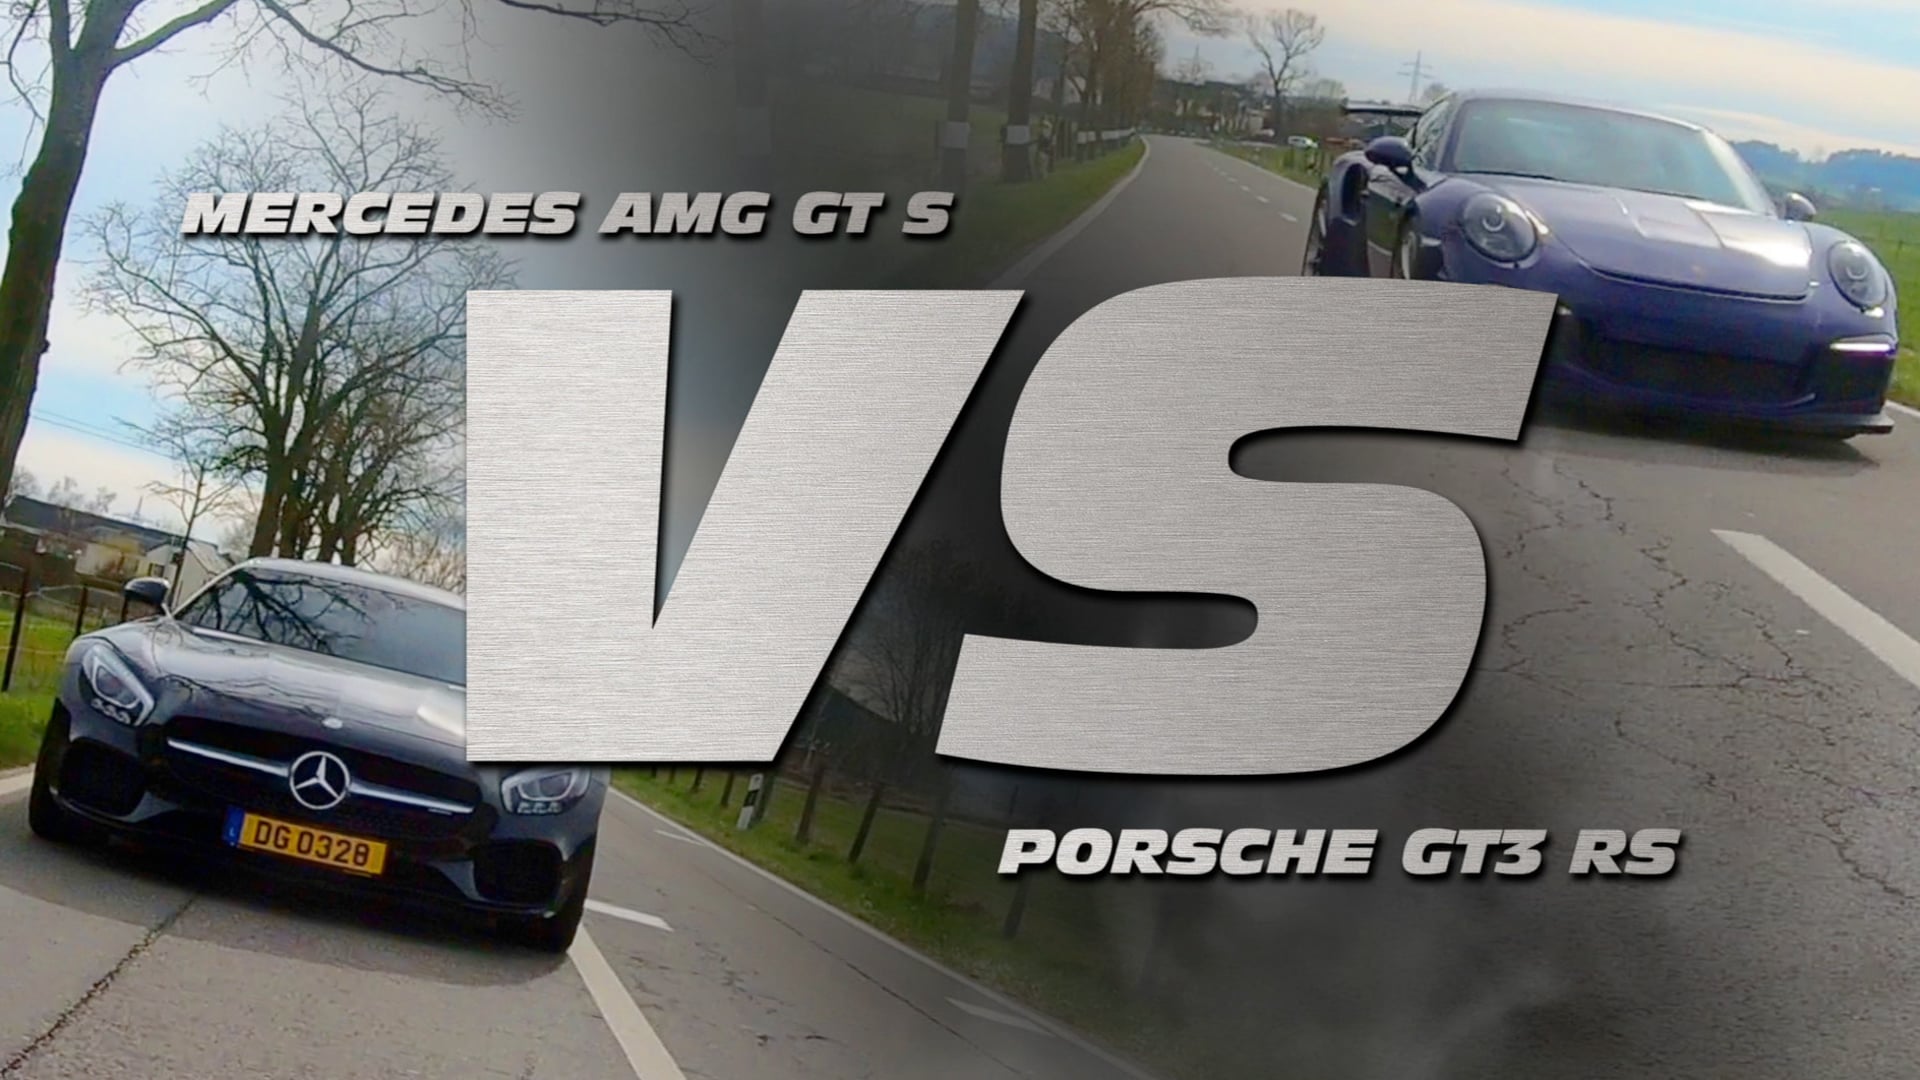 Porsche and Mercedes compete in a duel at the top – LUXE.TV - Vimeo thumbnail